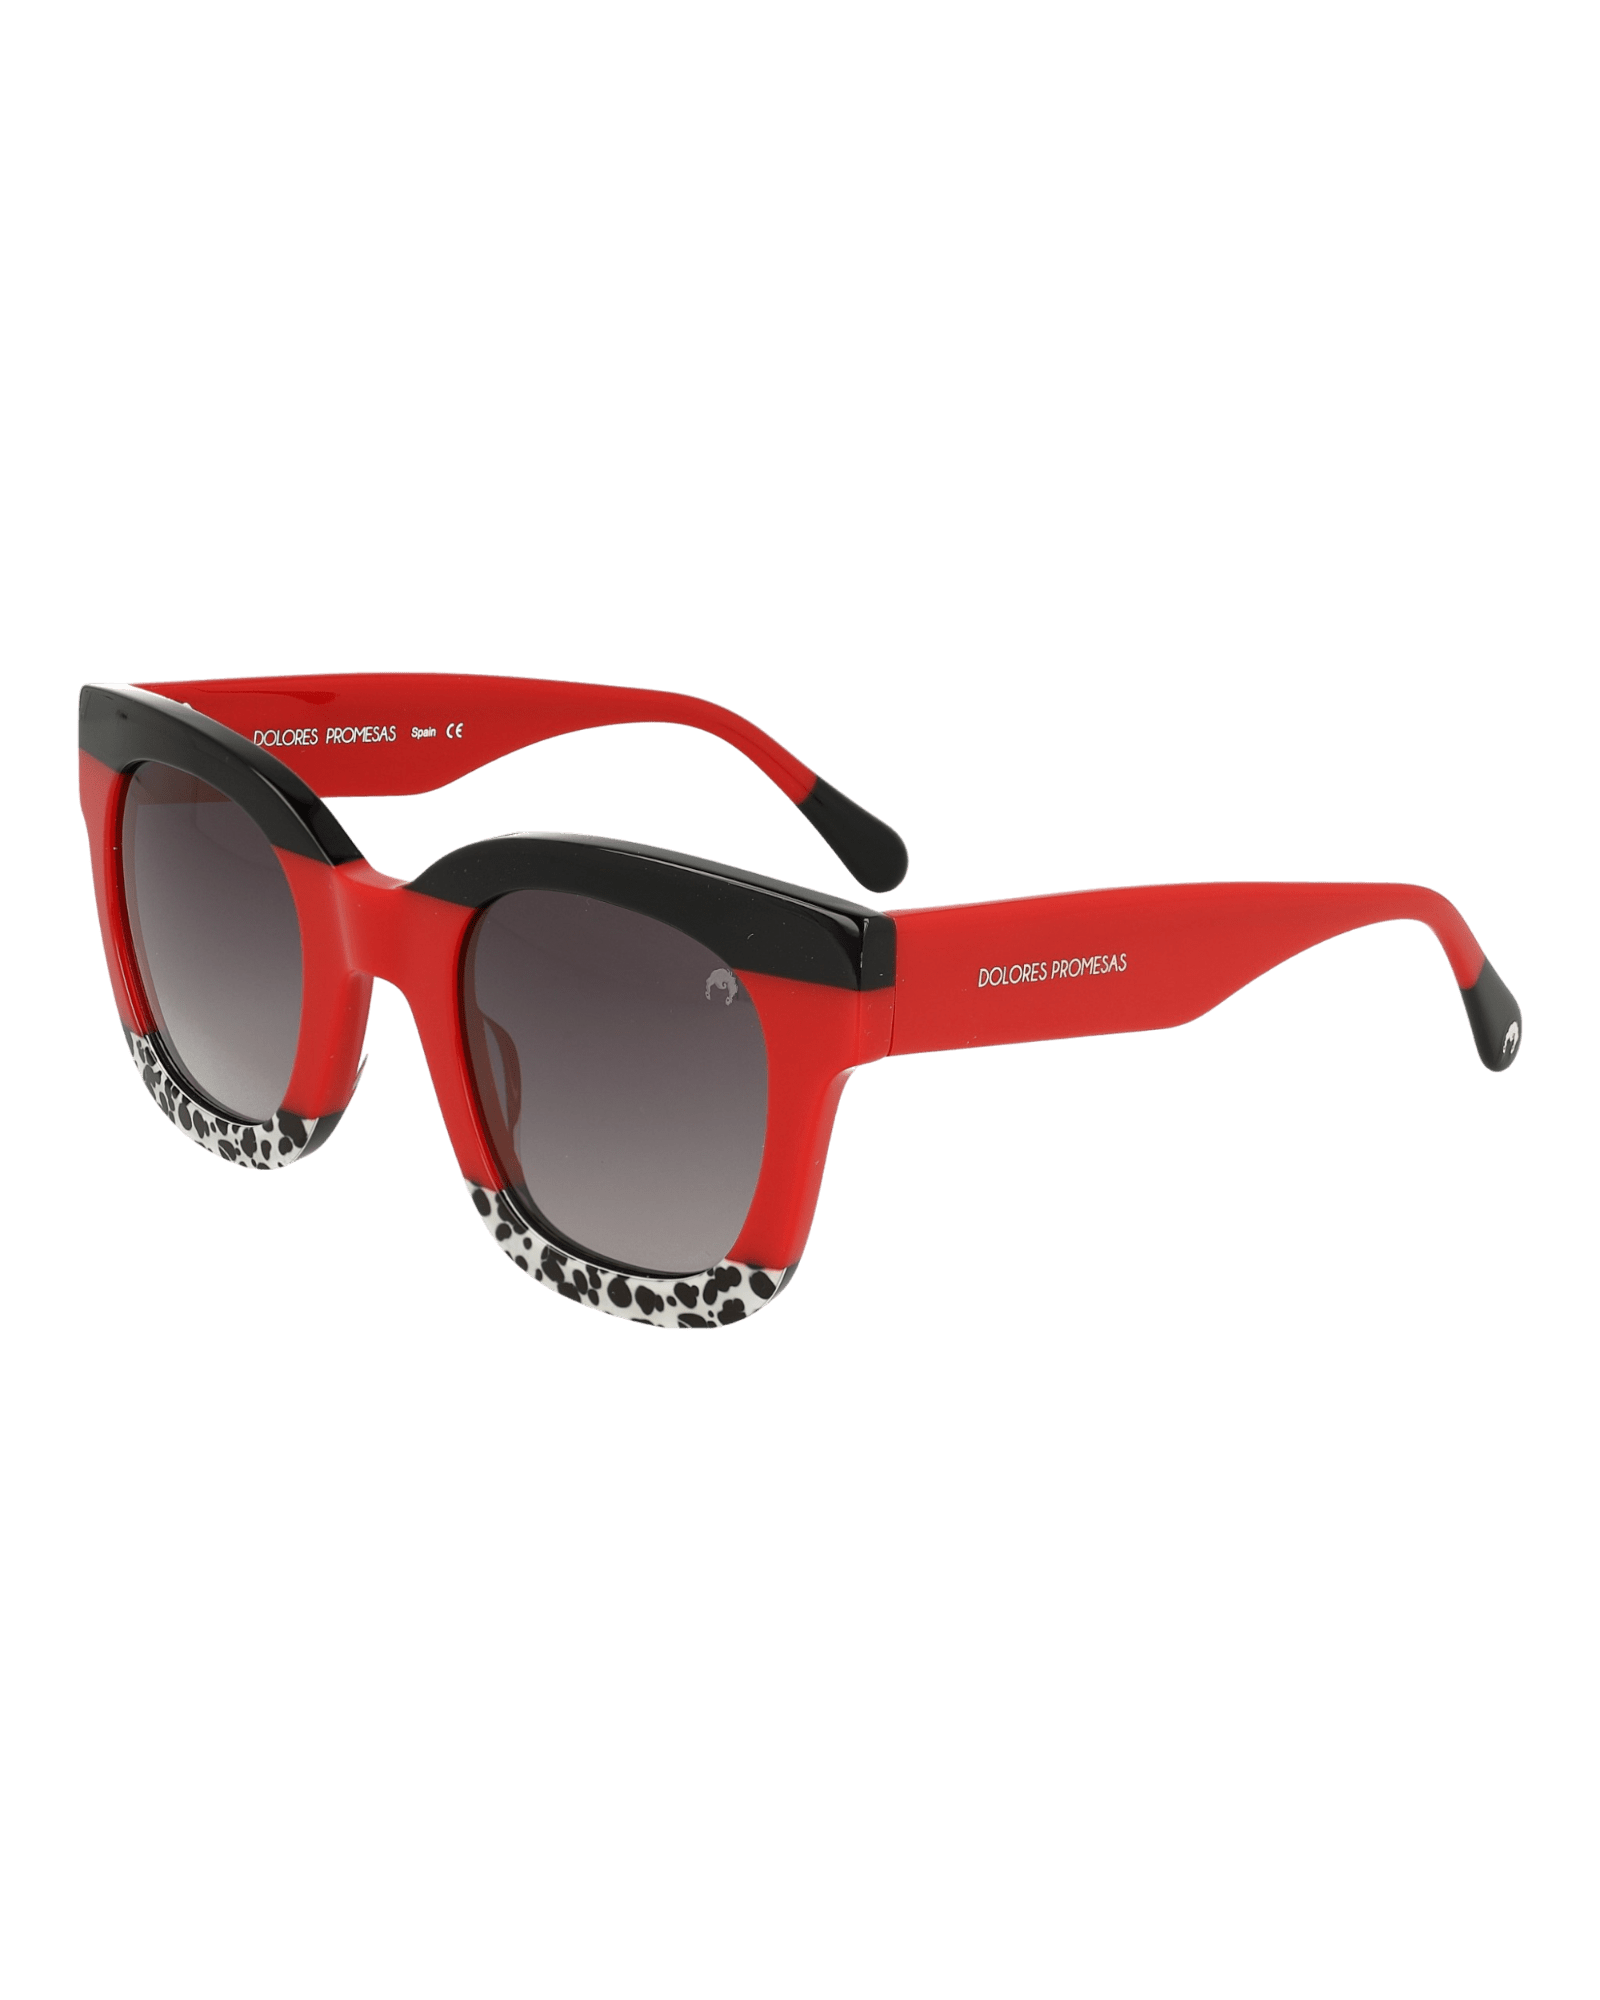 Women’s Black / Red Glasses With Red Square Patterned Trend One Size Dolores Promesas